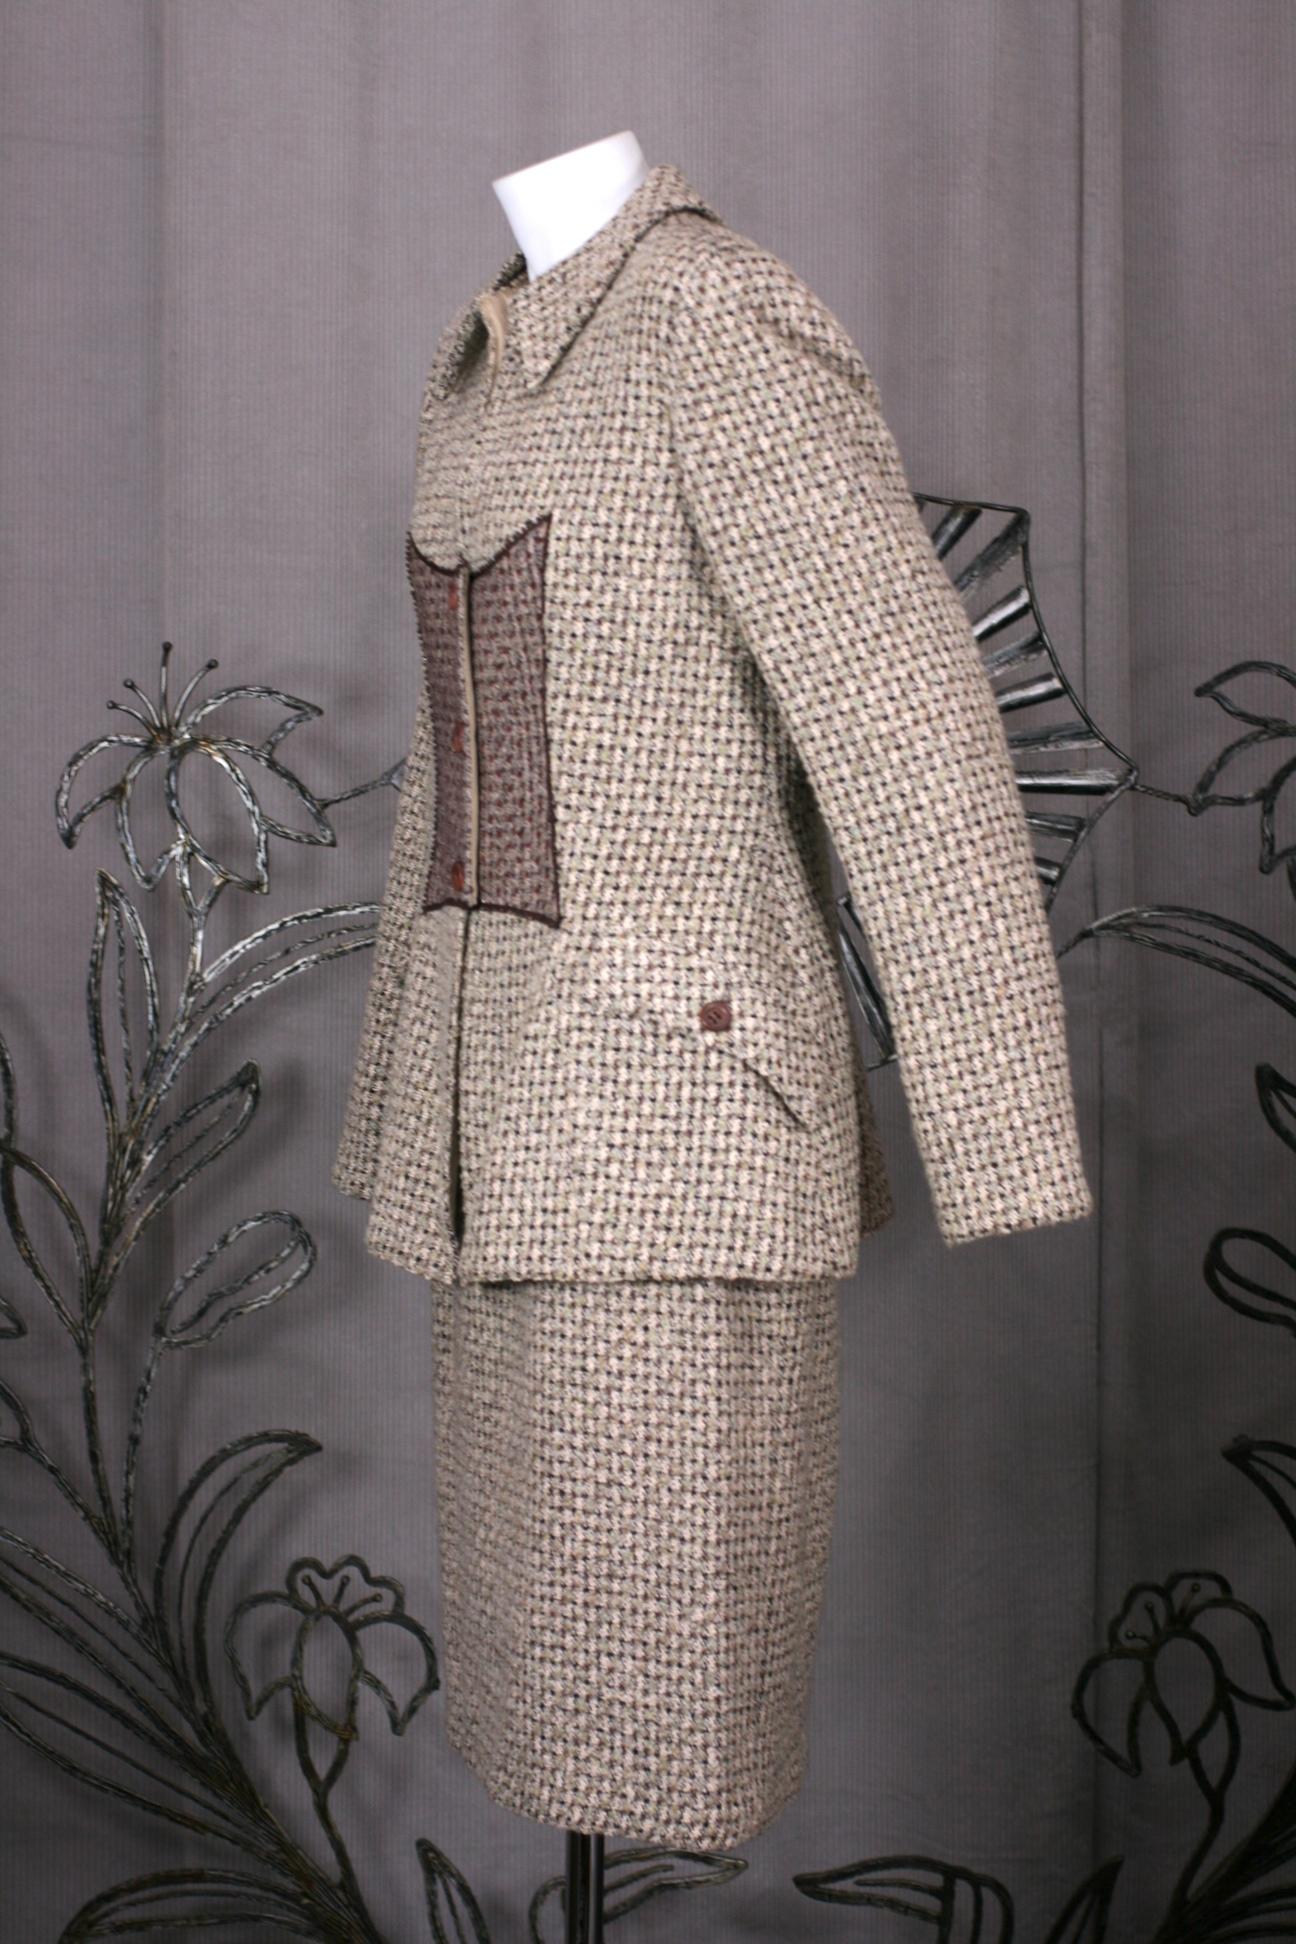 Geoffrey Beene Tweed and Tulle Overlaid Suit from the 1990's. Typical easy Beene cut with a textured tweed with a tulle overlay down front quilted in metallic thread. 
Size 8. 1990's USA. 